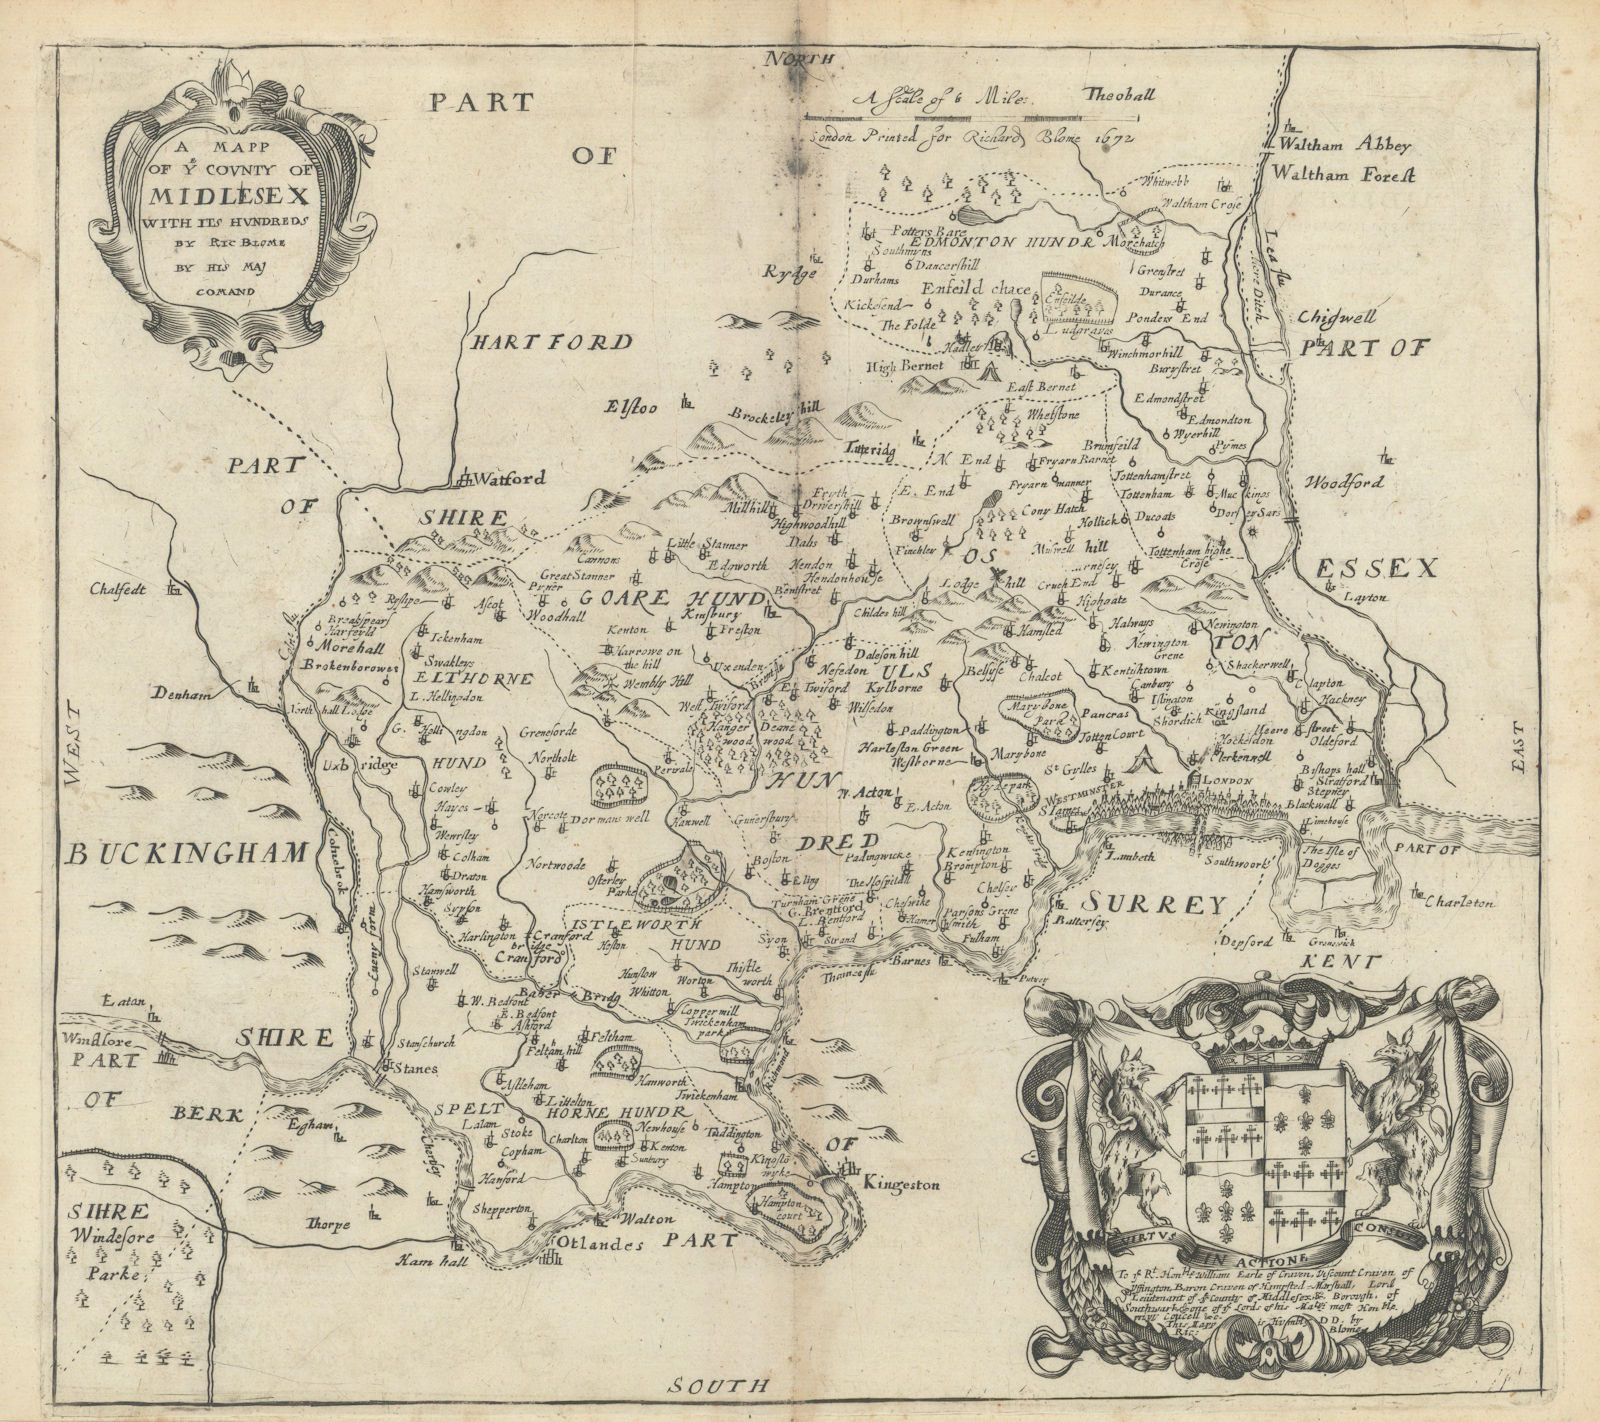 Associate Product A Mapp of ye County of Midlesex with its Hundreds by Richard Blome 1673